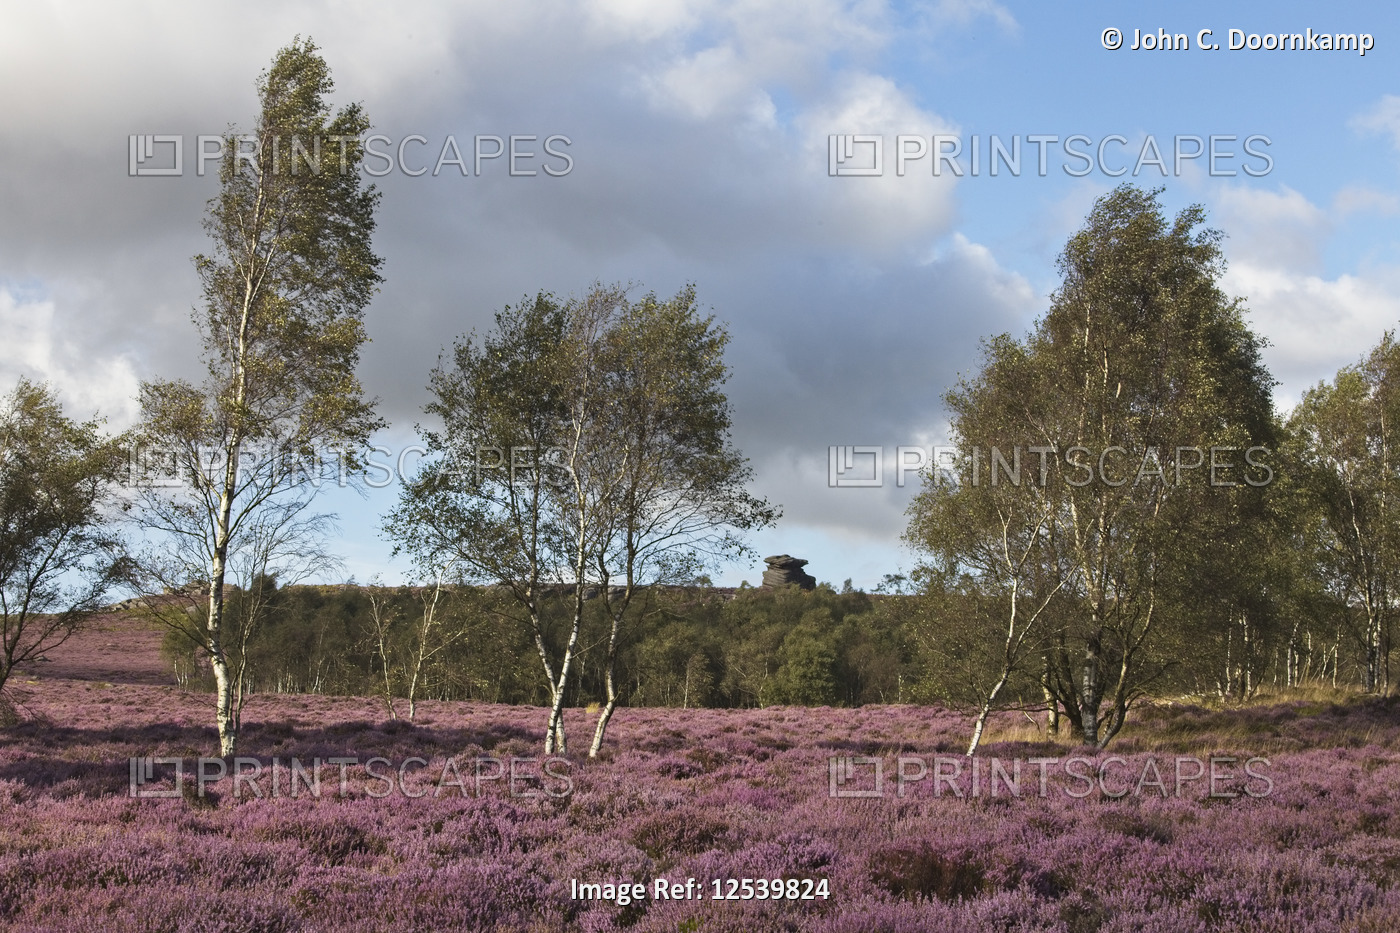 LANDSCAPE WITH PURPLE HEATHER AND SILVER BIRCH TREES